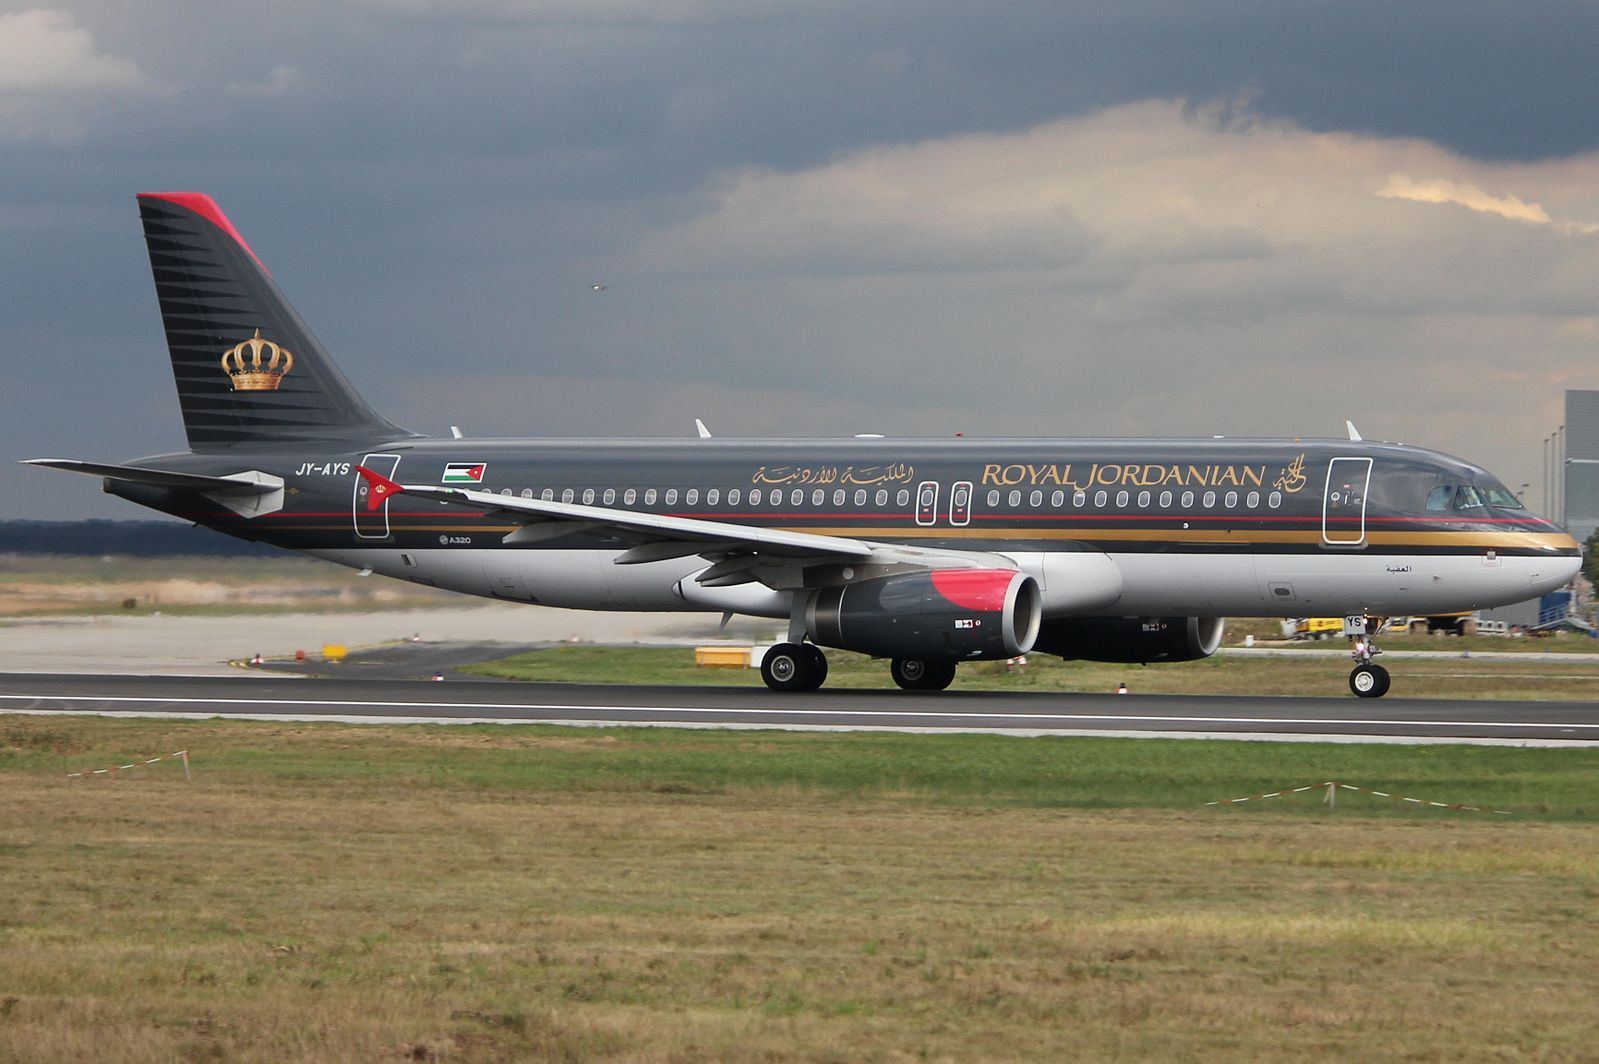 Royal Jordanian Launches 5 Hour 15 Minute Airbus A320 Flights To Stockholm